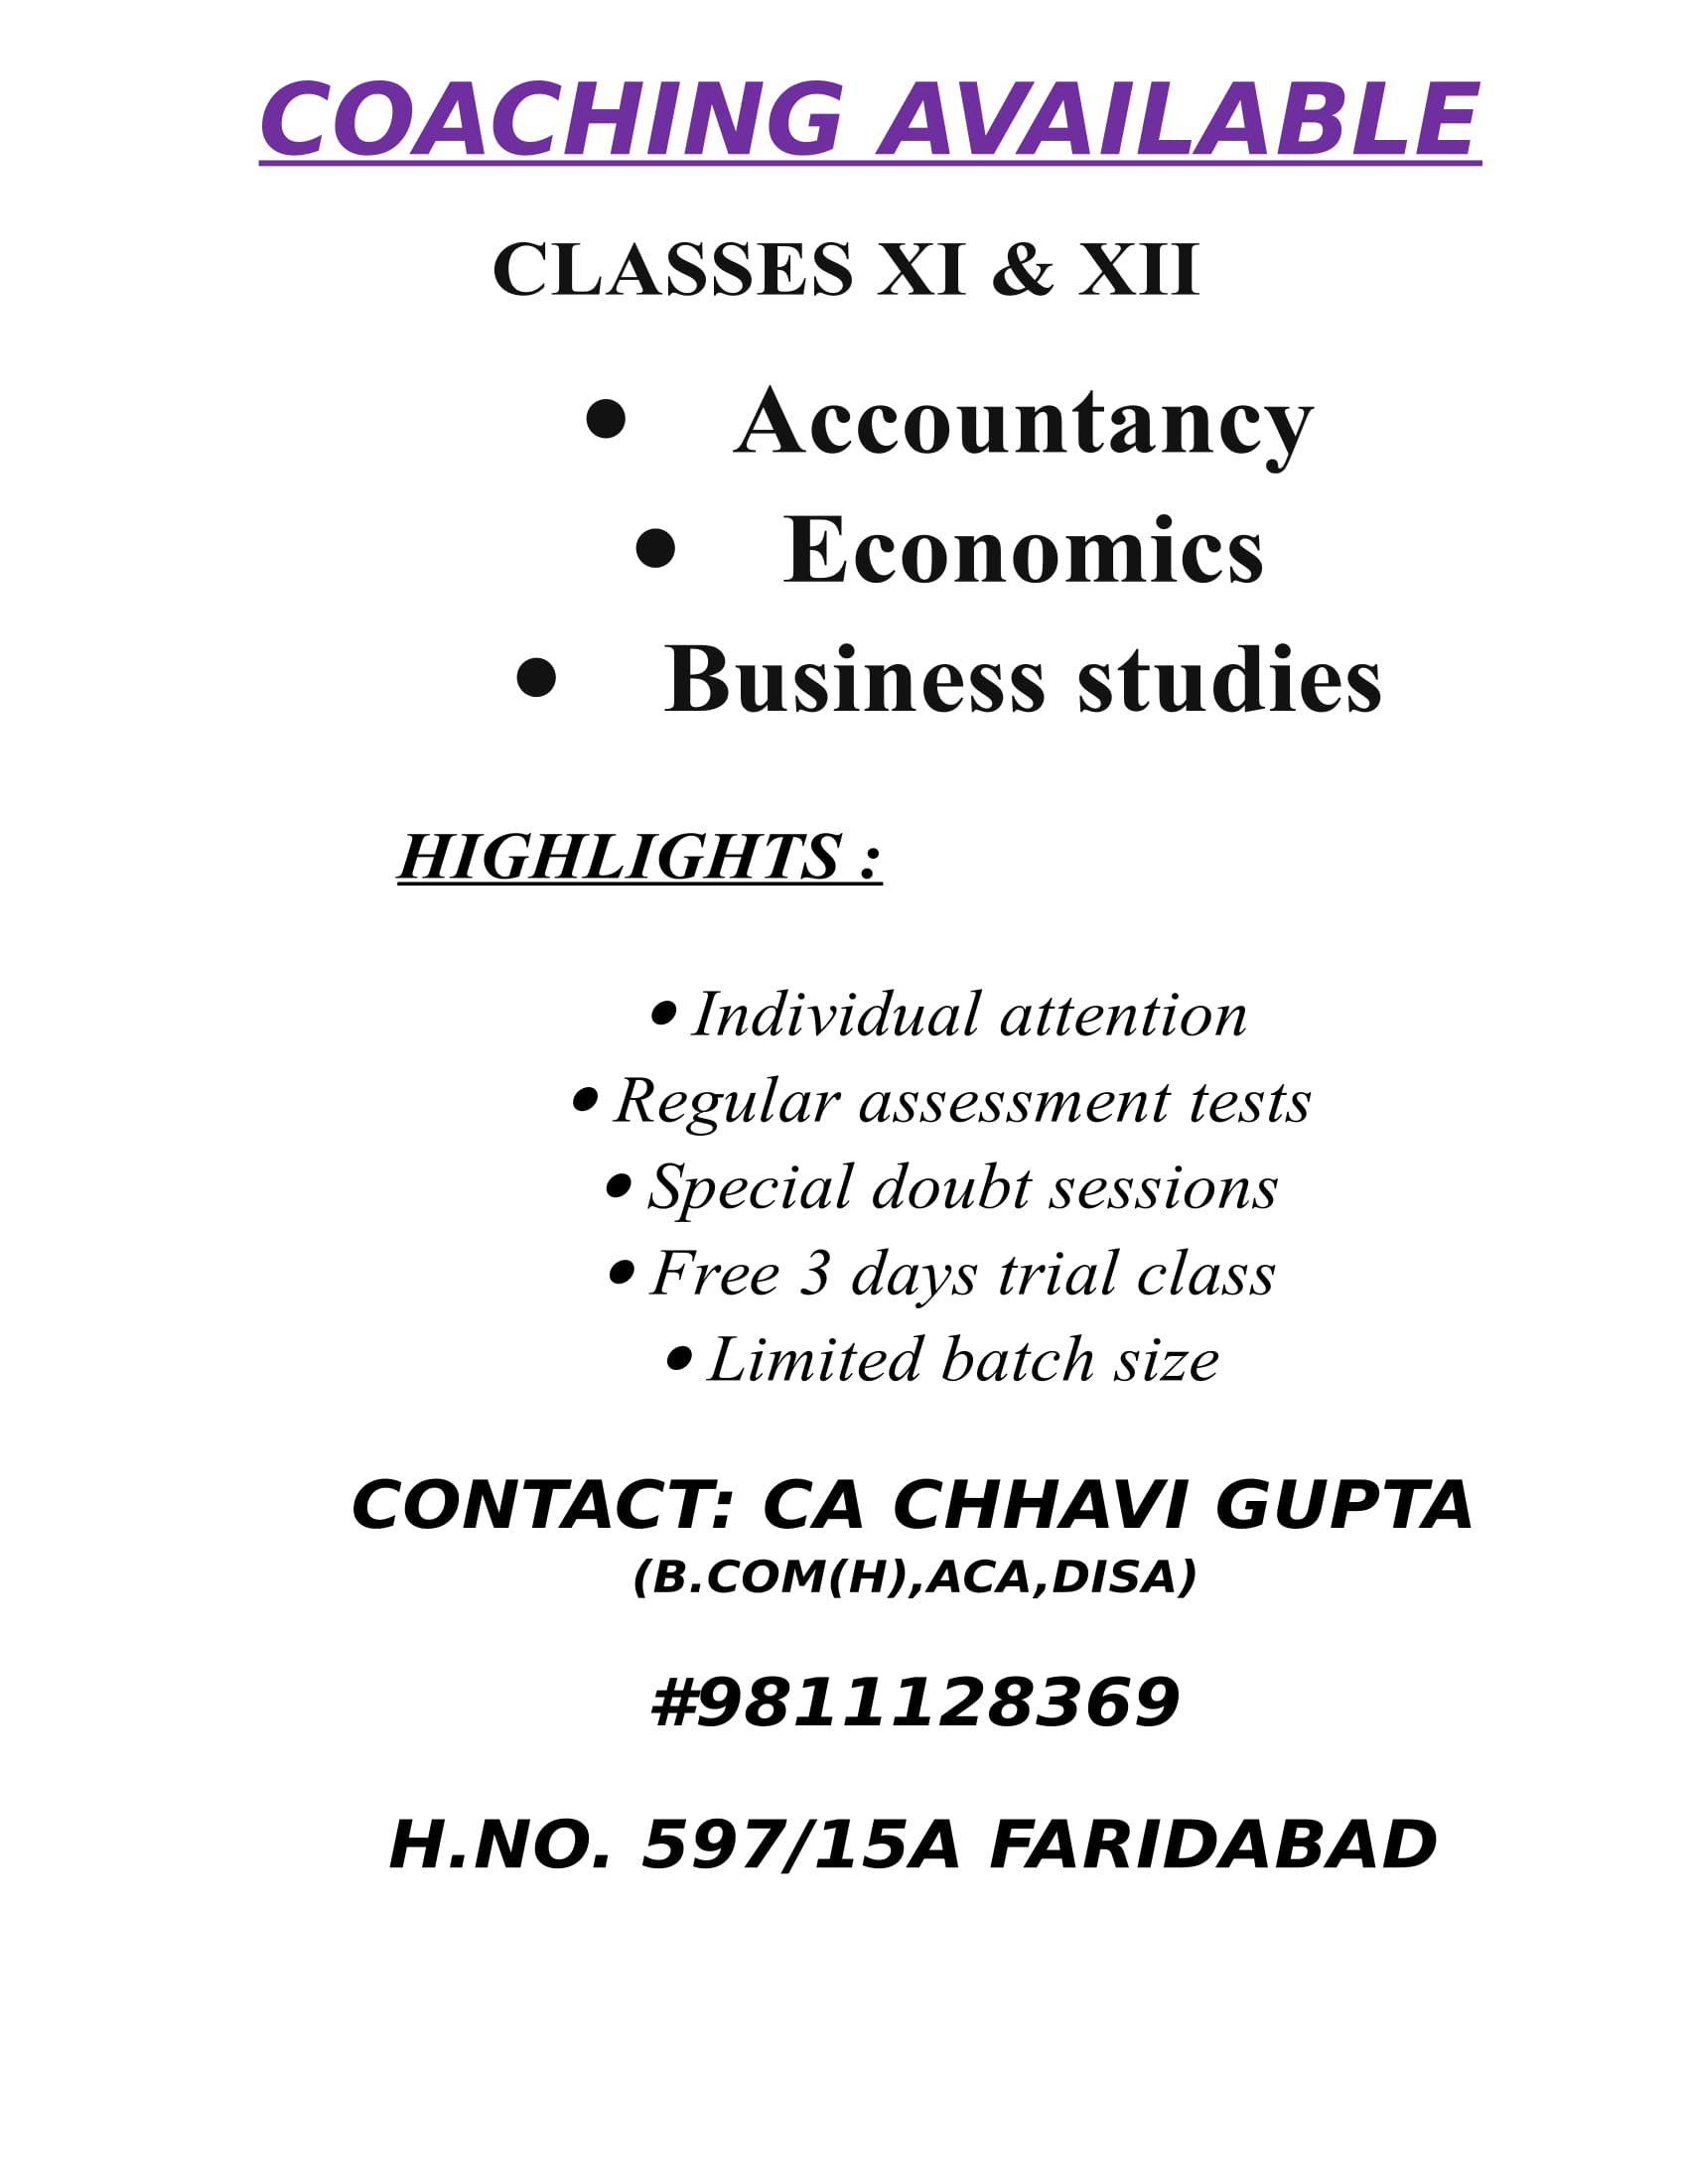 Tuition ServicesEducation and LearningPrivate TuitionsFaridabadAjronda